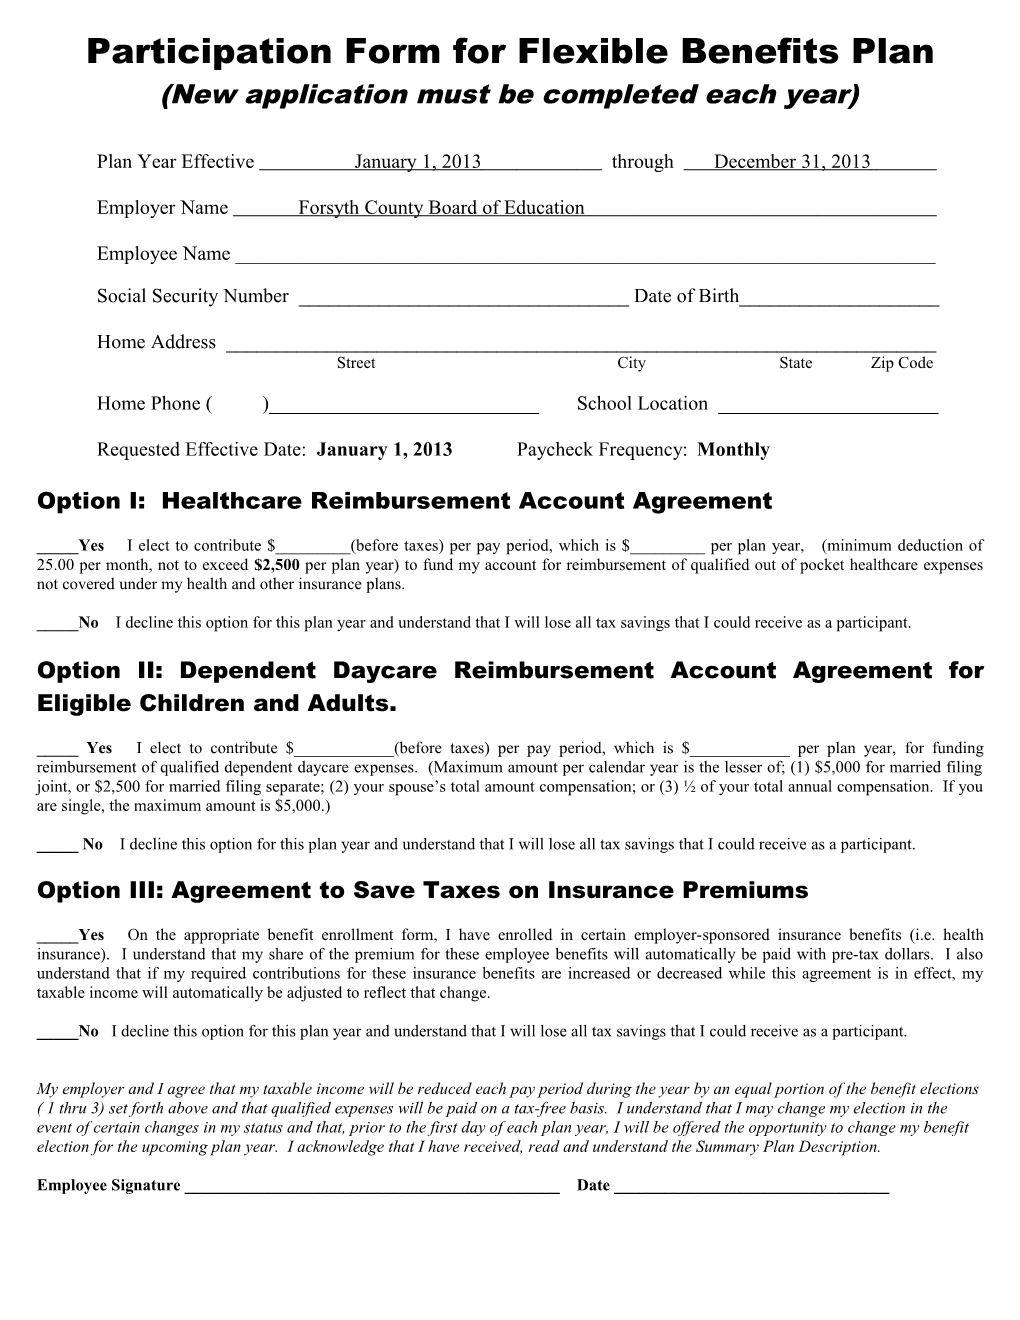 Participation Form for the Cafeteria Benefits Plan